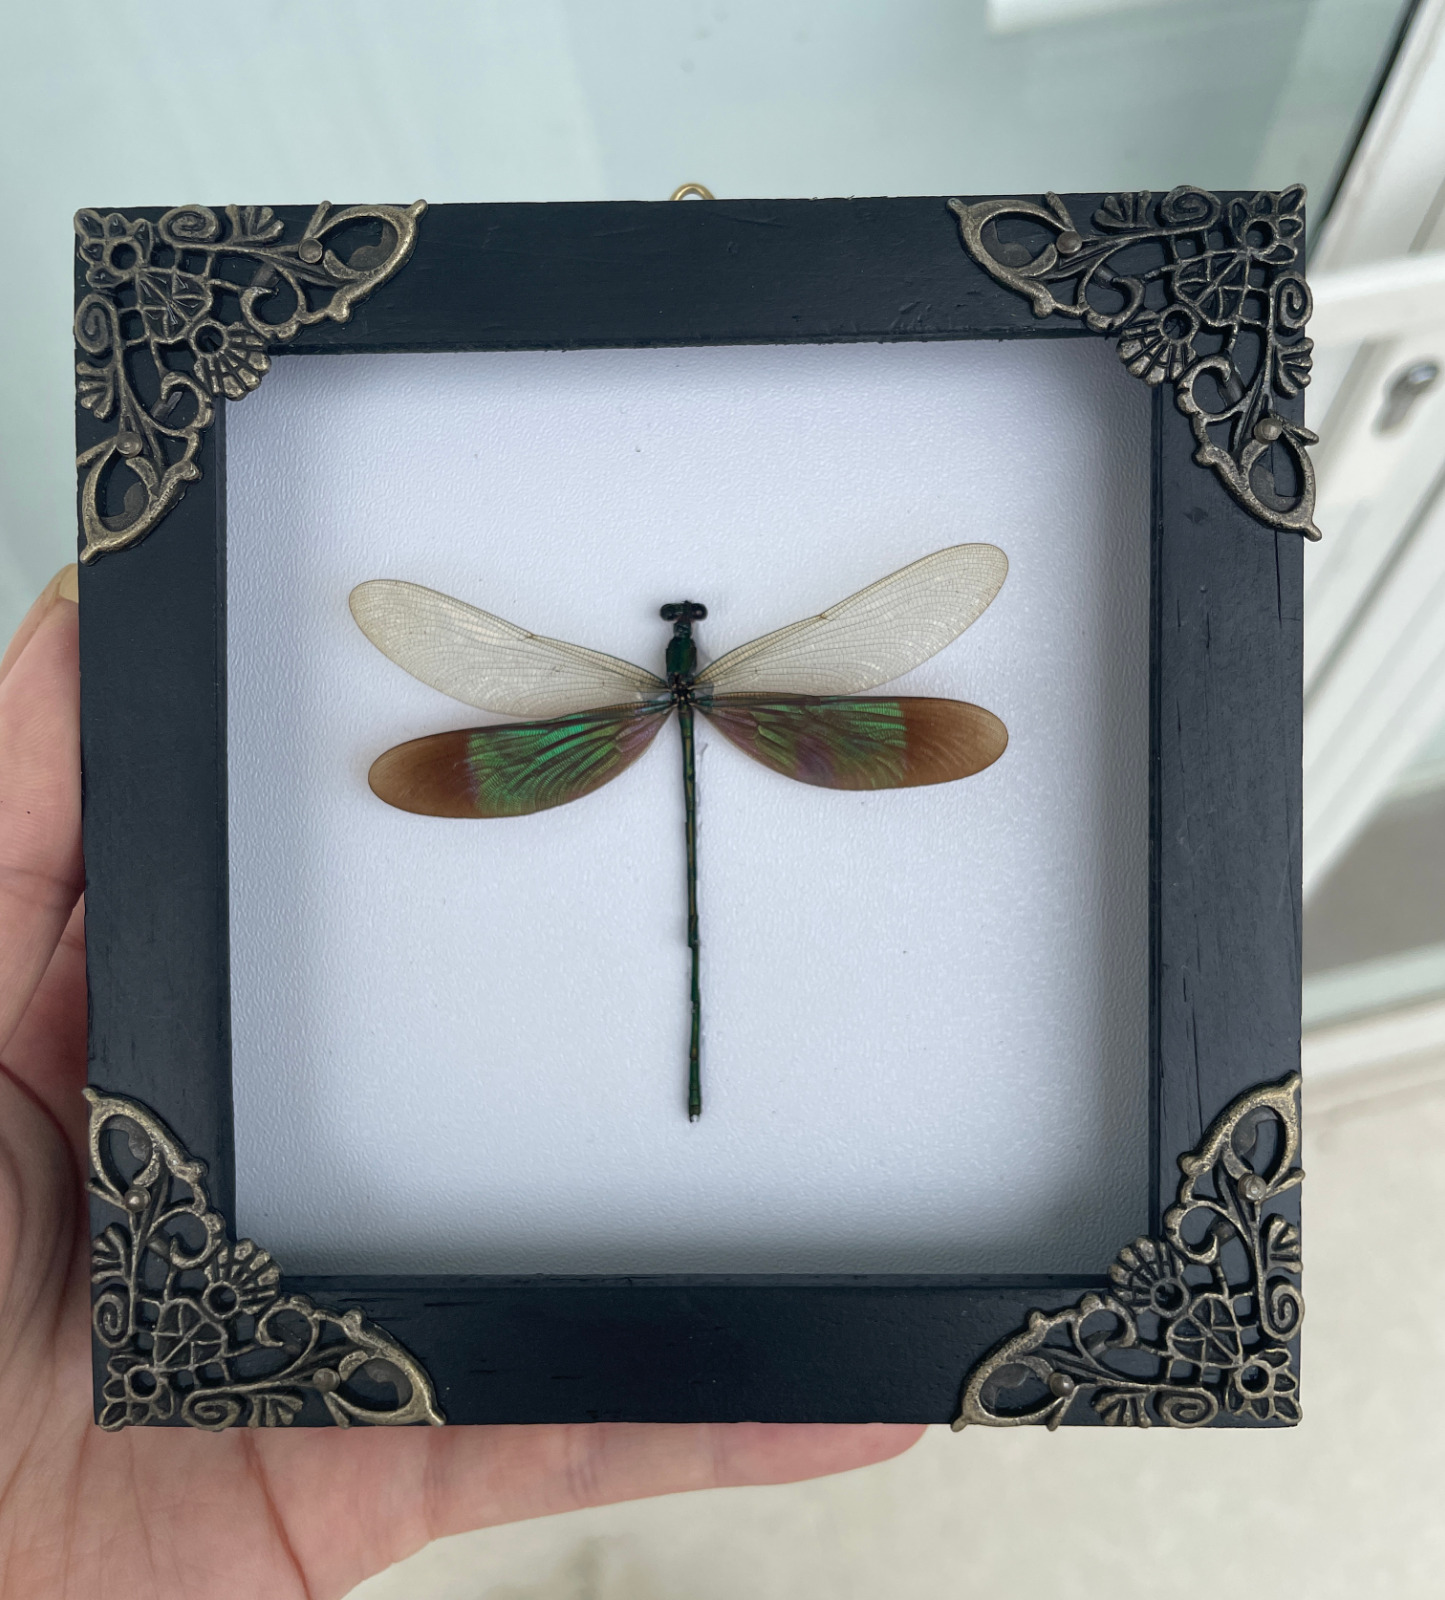 Real Wings Dragonfly Framed Preserved Insect Specimen Wall Decor Handmade